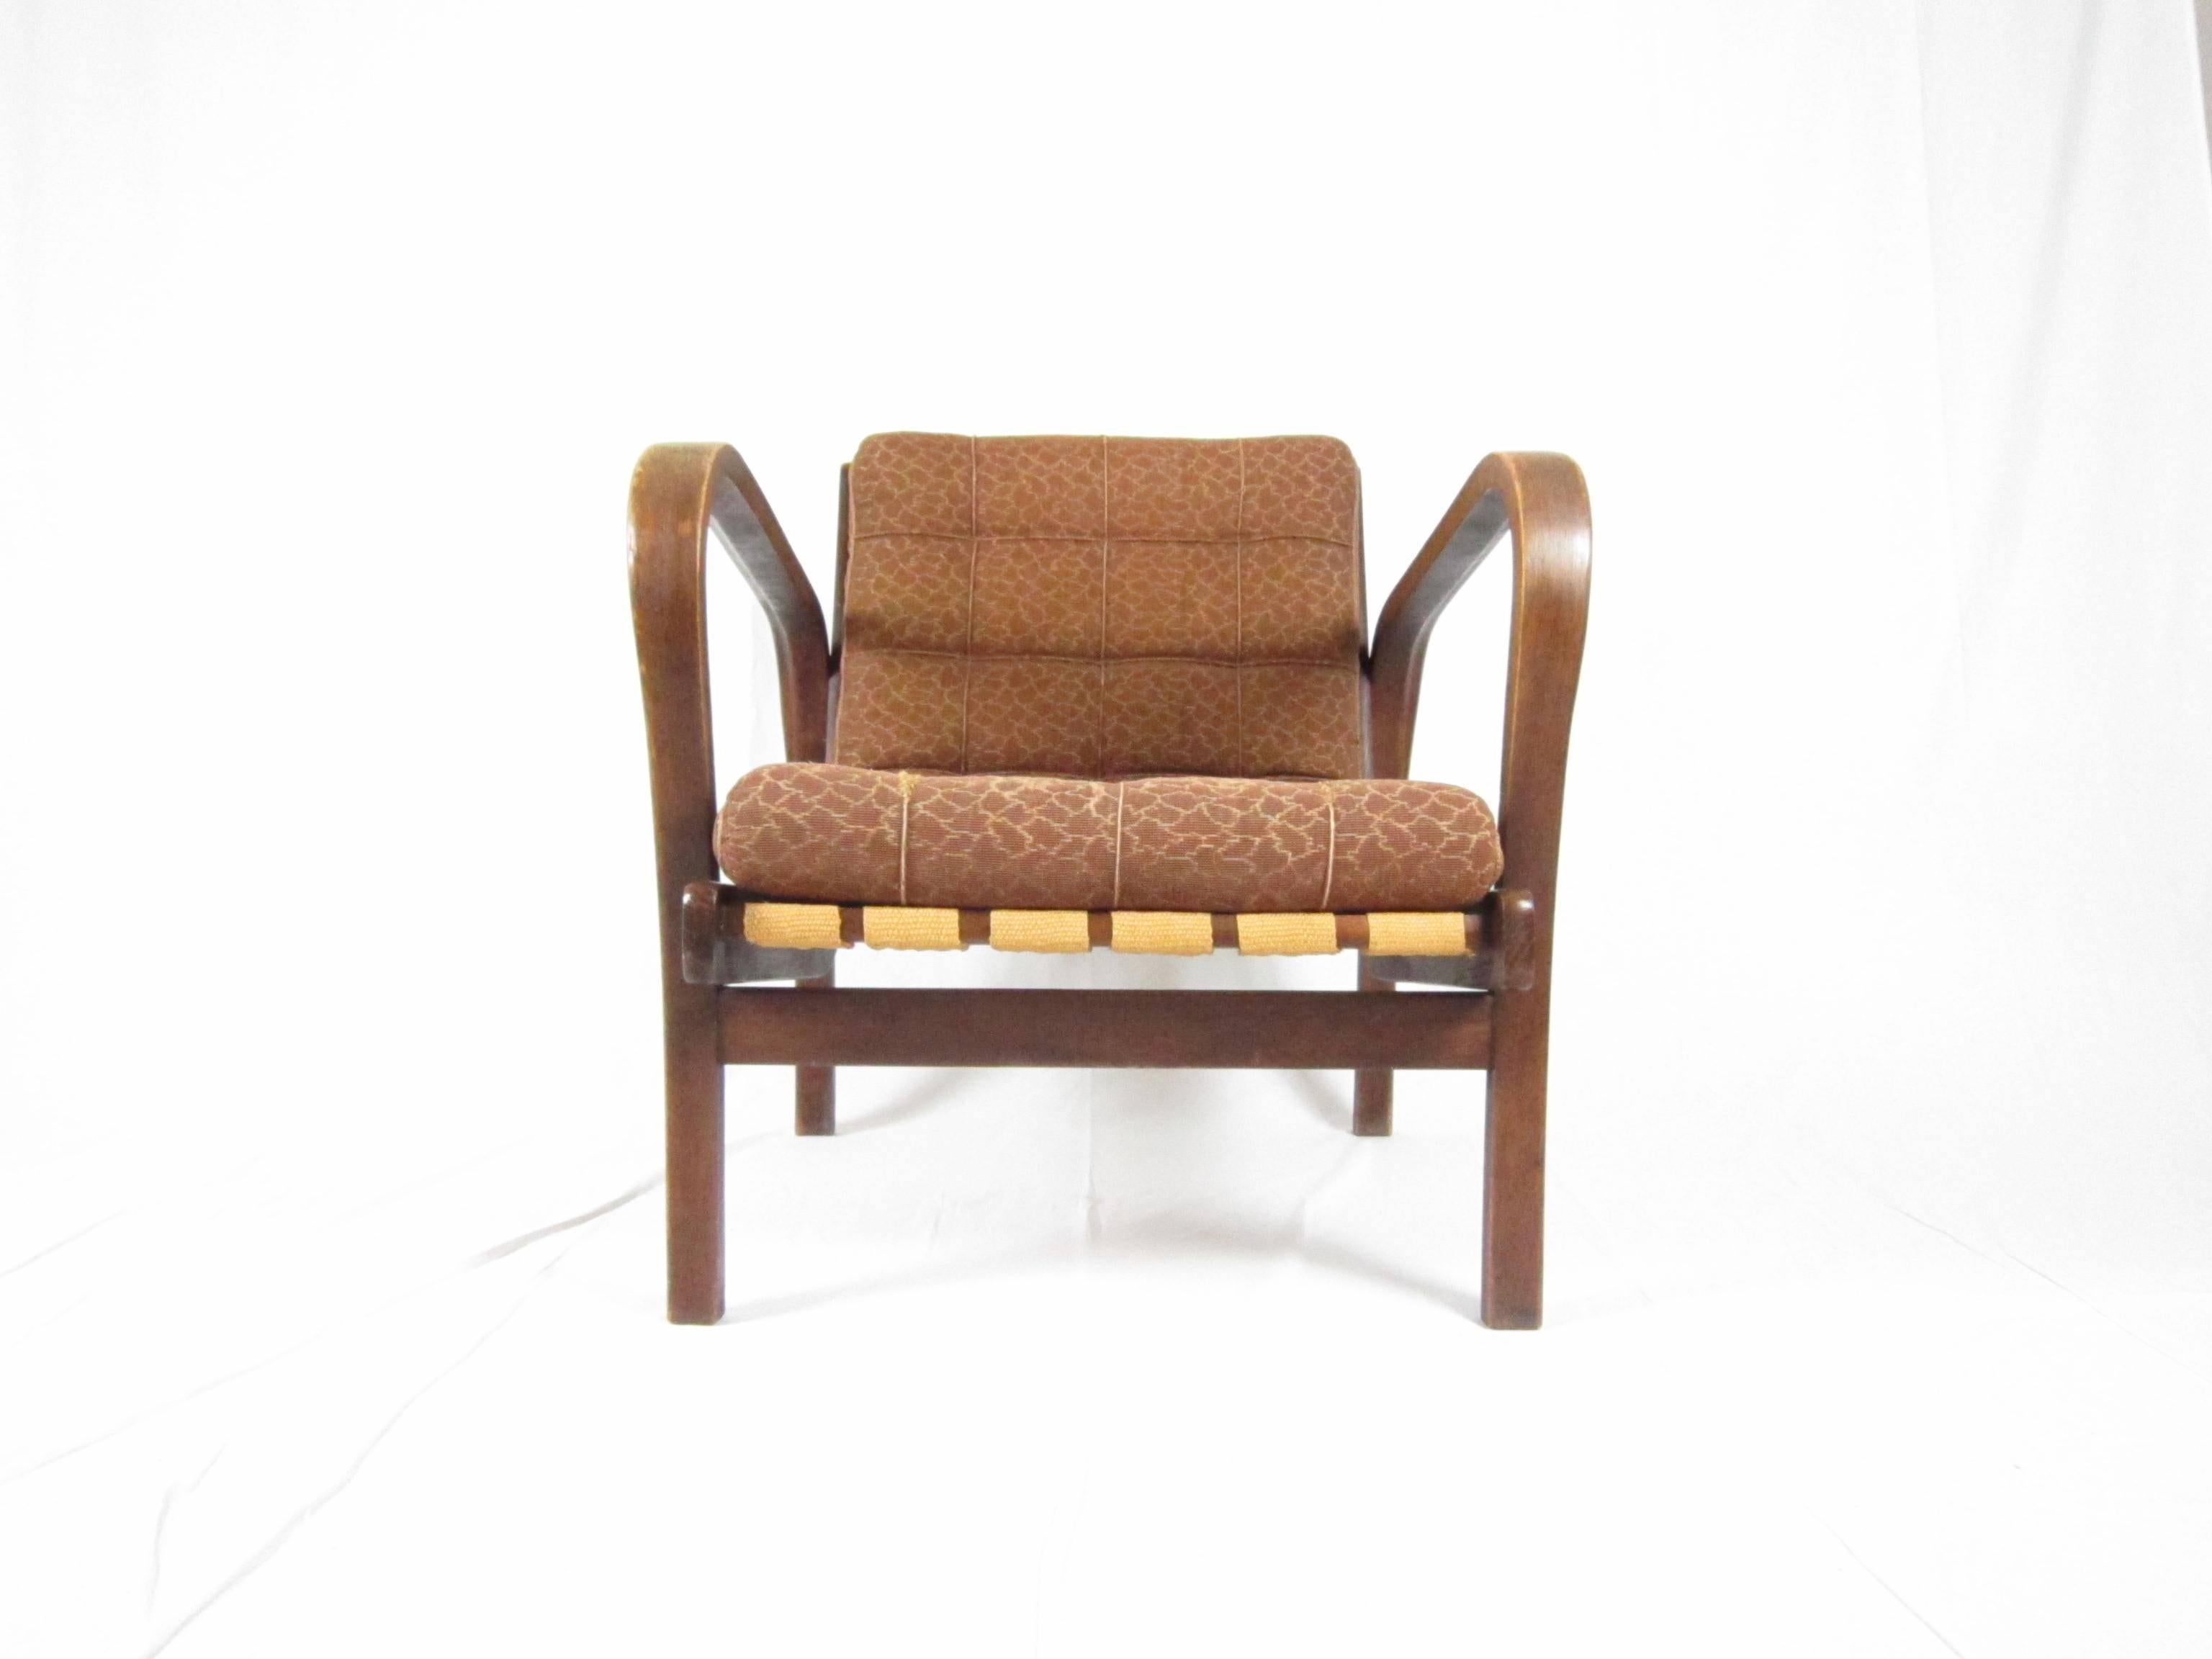 1940s lounge chair made in Czech republik and designed by Karel Kozelka & Antonin Kropacek. This model won the silver metal at the Triennale in 1944. 
The item is in very good original condition (including fabric upholstery).